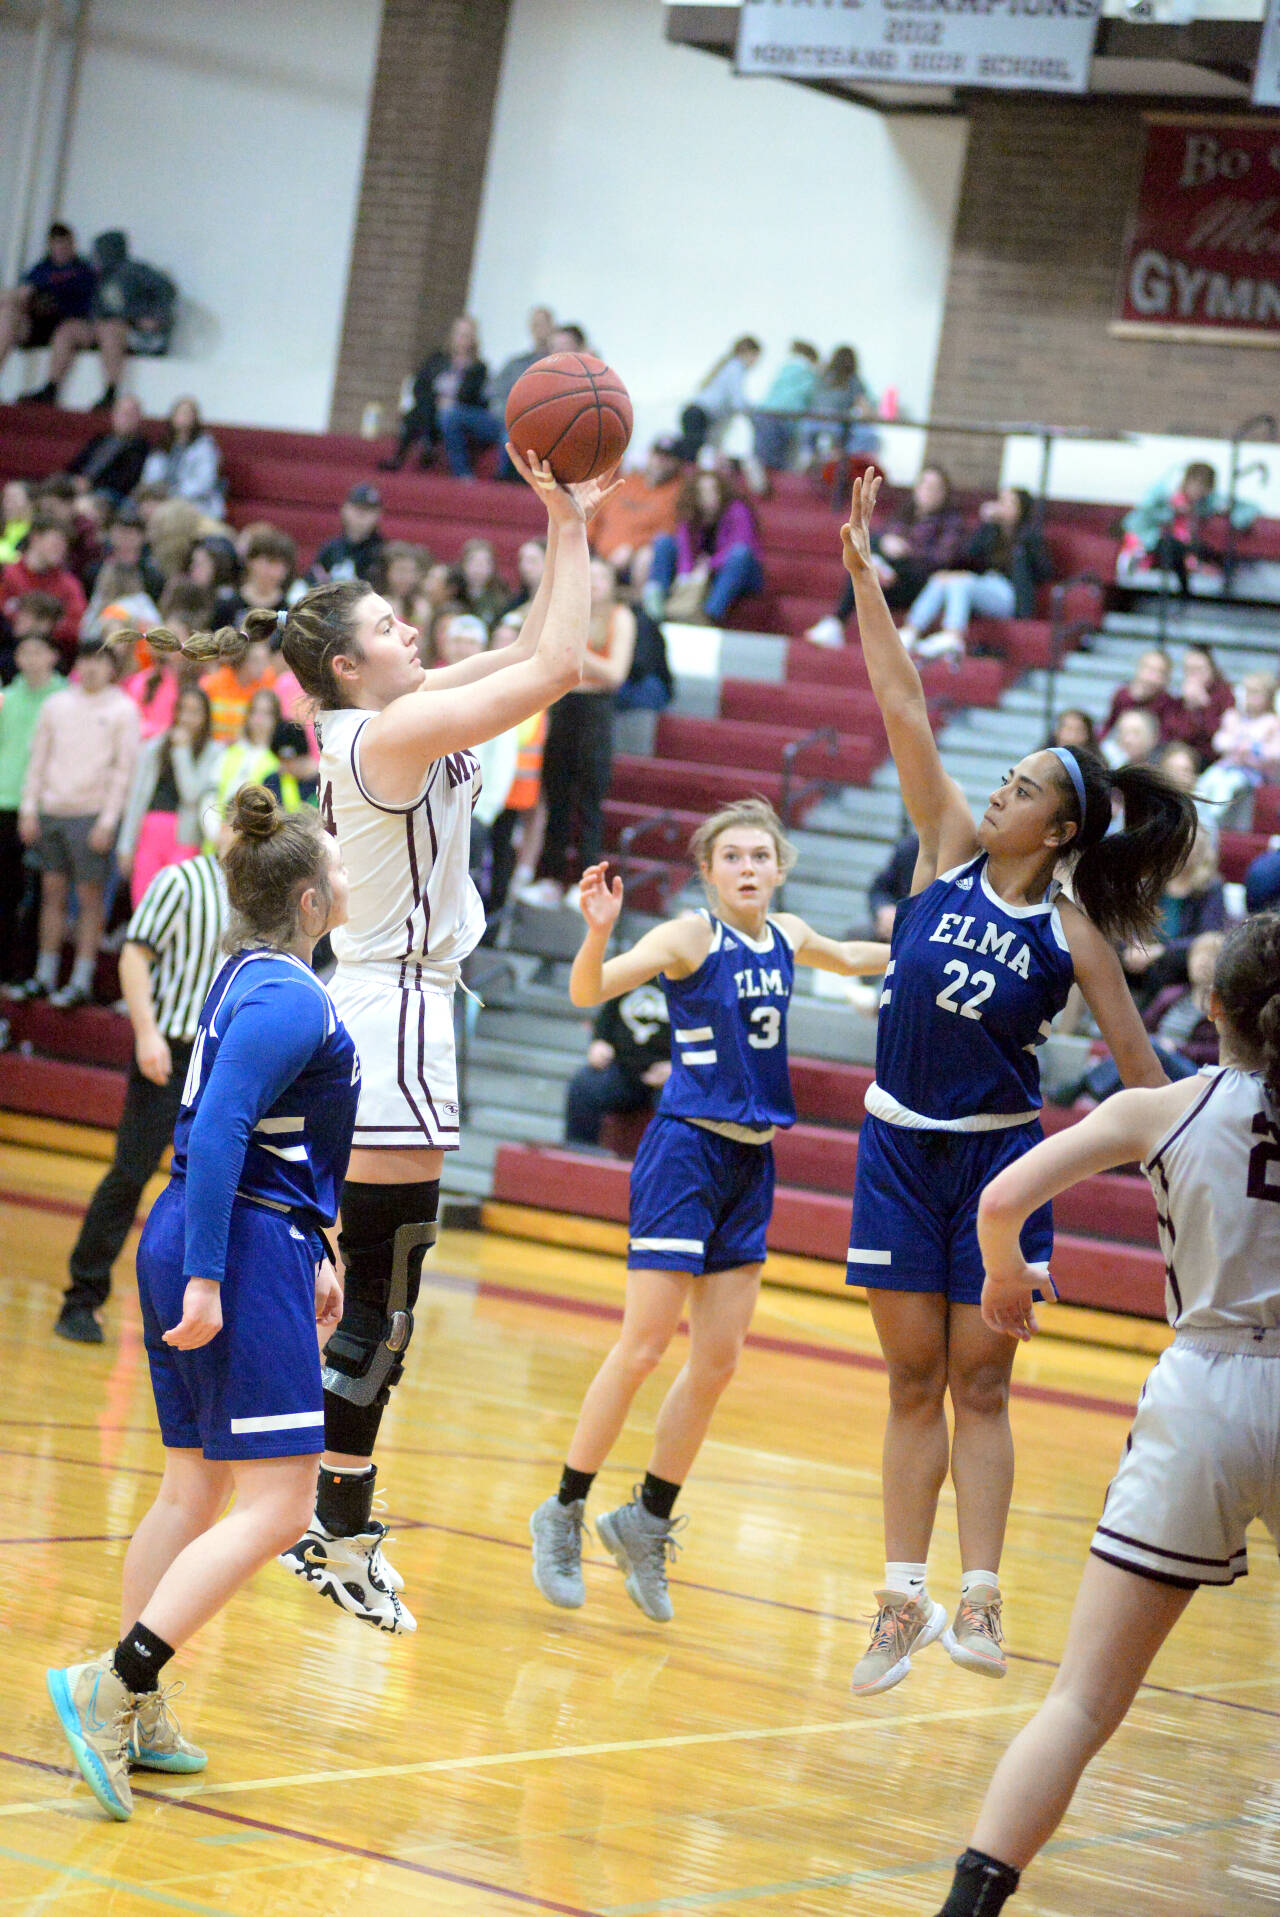 RYAN SPARKS | THE DAILY WORLD Montesano senior McKynnlie Dalan, left, hits a jumper while being defended by Elma’s Eliza Sibbett (22) during the Bulldogs’ 84-19 victory on Tuesday in Montesano. Dalan scored a game high 30 points in the East County Civil War matchup.